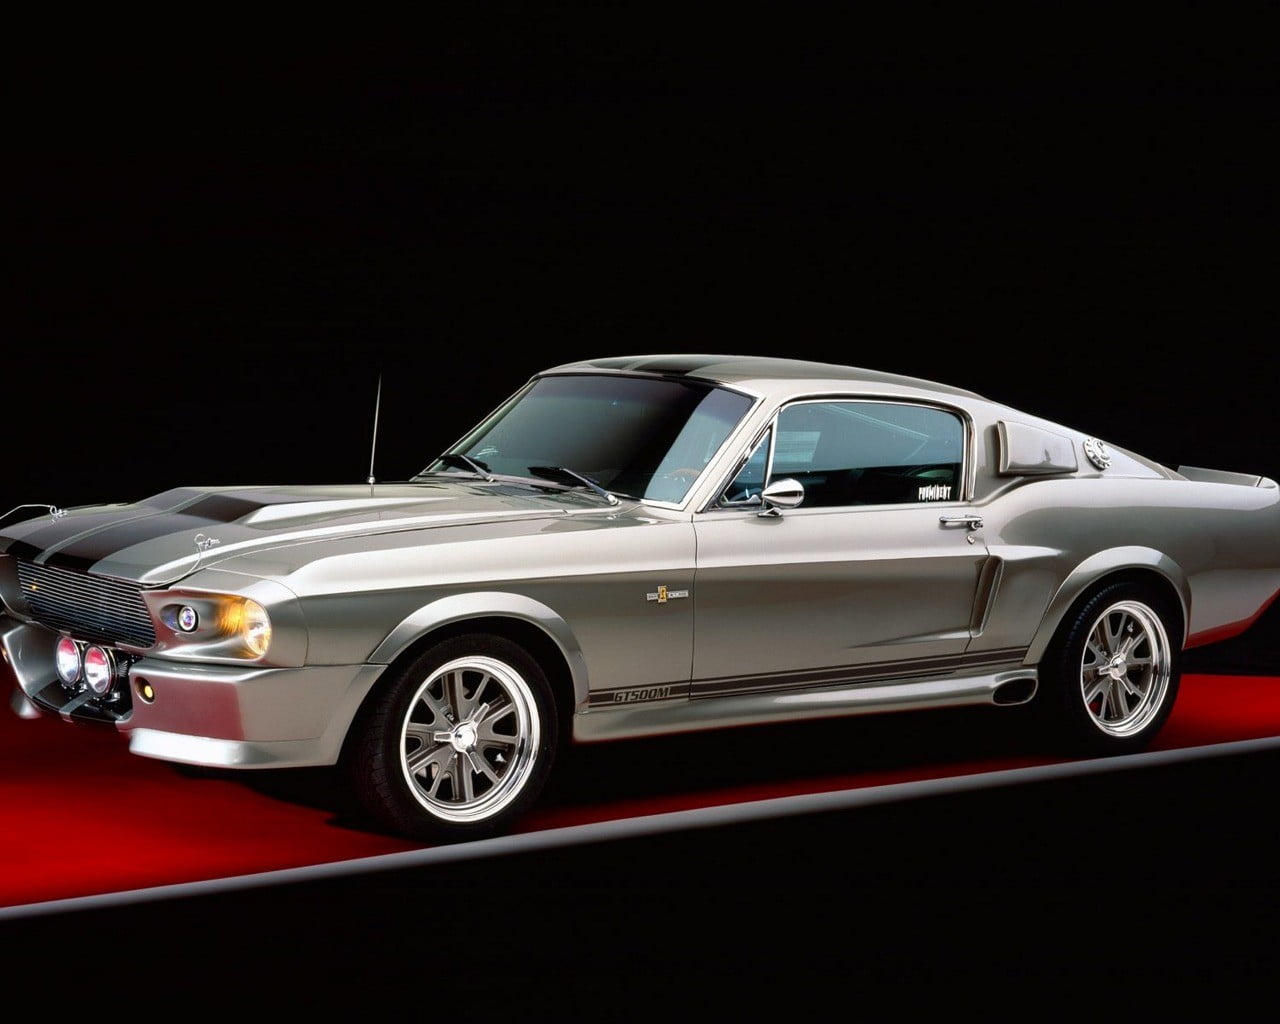 silver Ford Mustang coupe, Ford Mustang, vehicle, car, silver cars